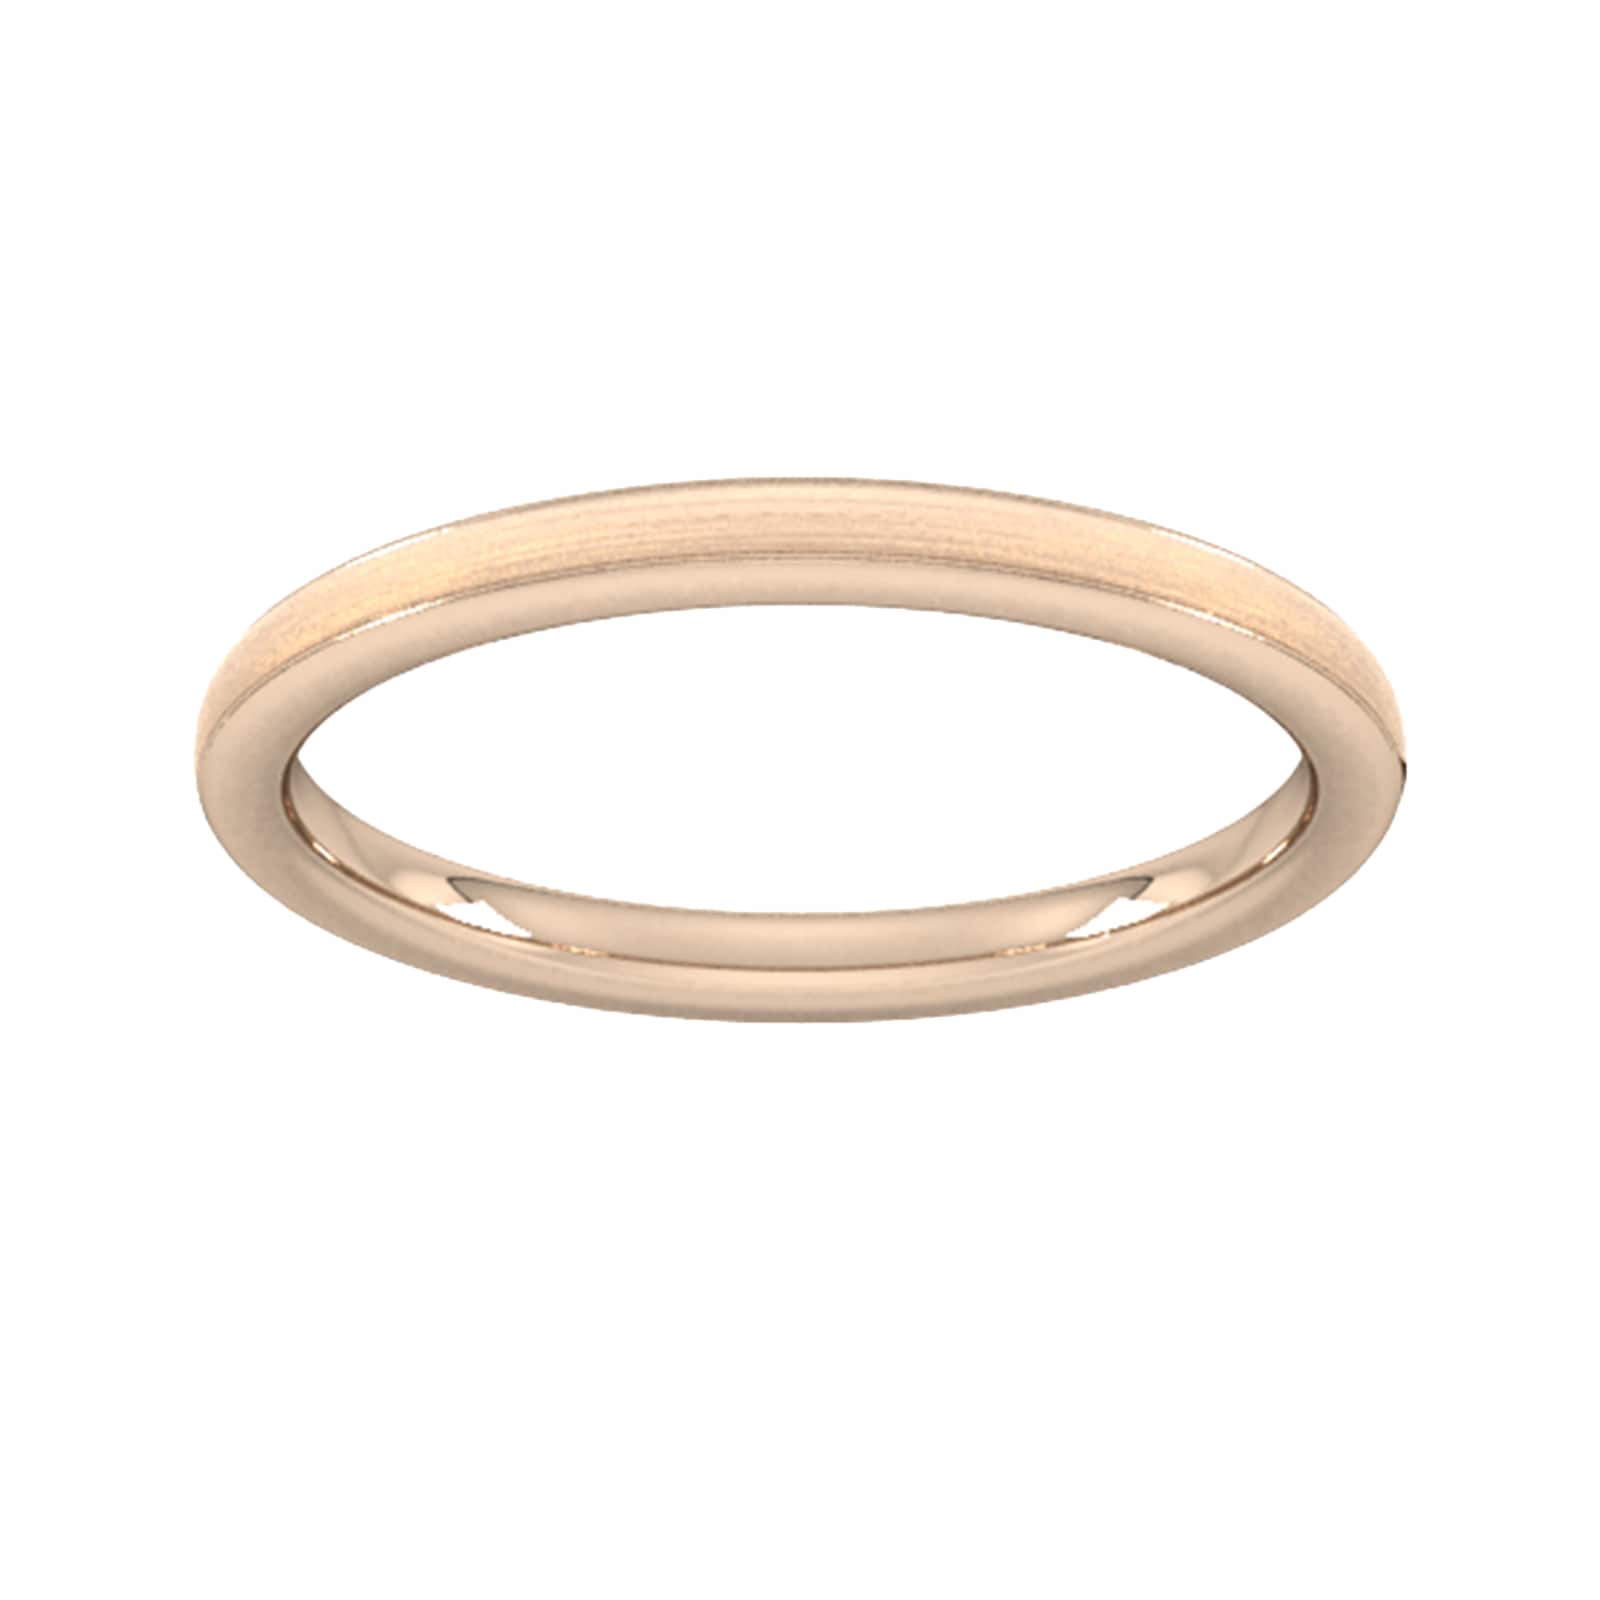 2mm Flat Court Heavy Matt Centre With Grooves Wedding Ring In 9 Carat Rose Gold - Ring Size L